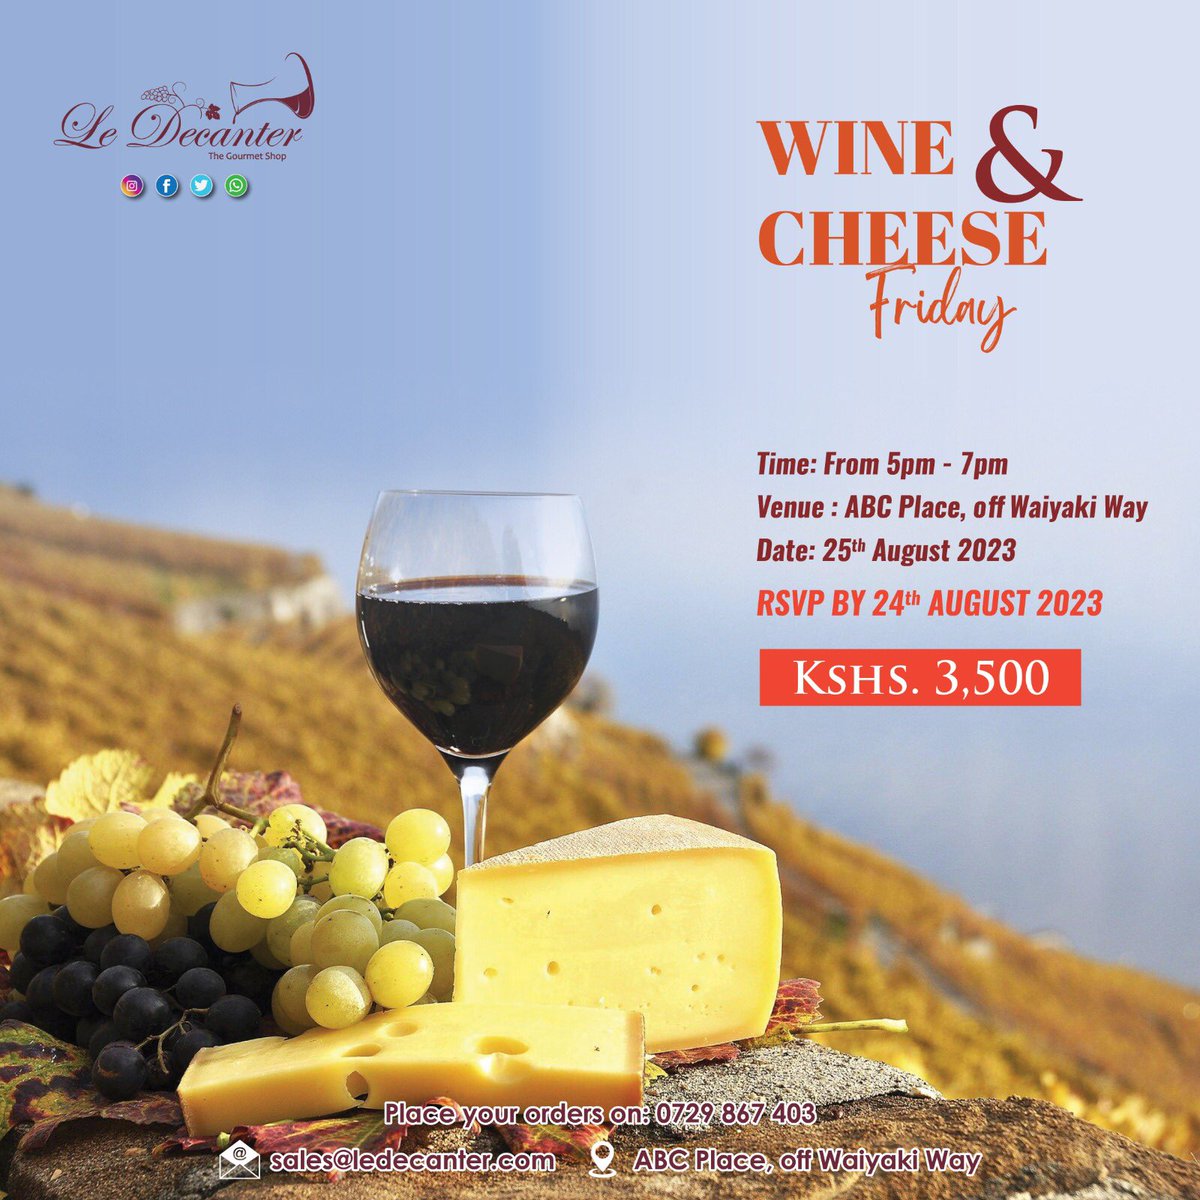 Join us this Friday, 25th August 2023 for our Wine and Cheese Fridays. At only 3,500/= To book kindly Call / WhatsApp us on 0729867403 Email us on sales@ledecanter.com #wineevents #frenchwineandcheese #ledecanterwines